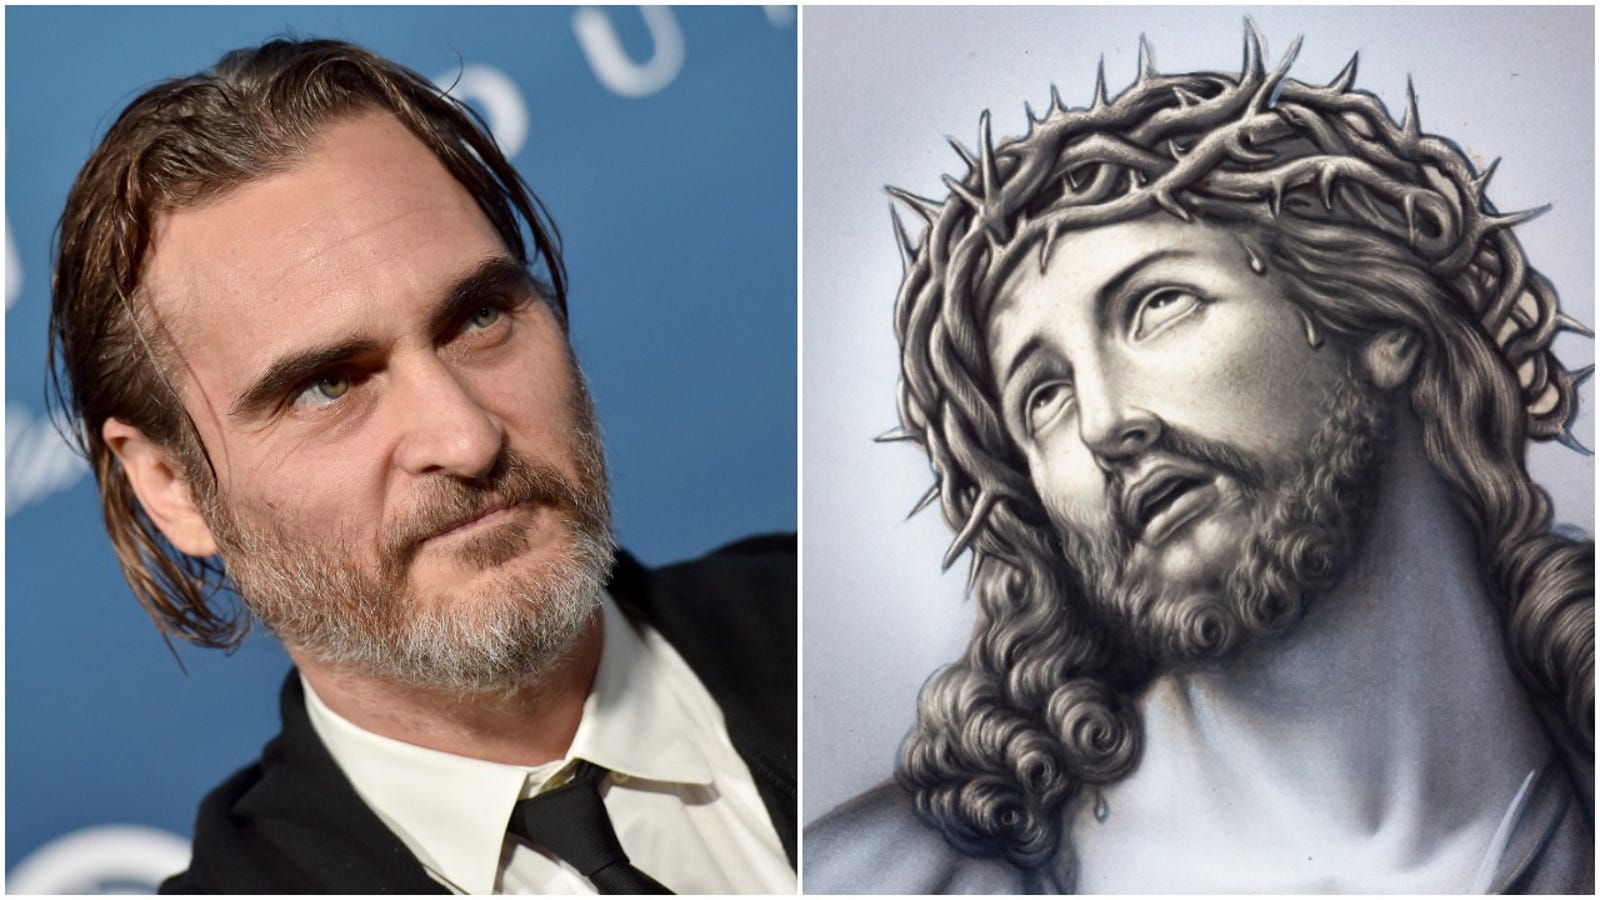 Joaquin Phoenix is playing Jesus in a Mary Magdalene movie